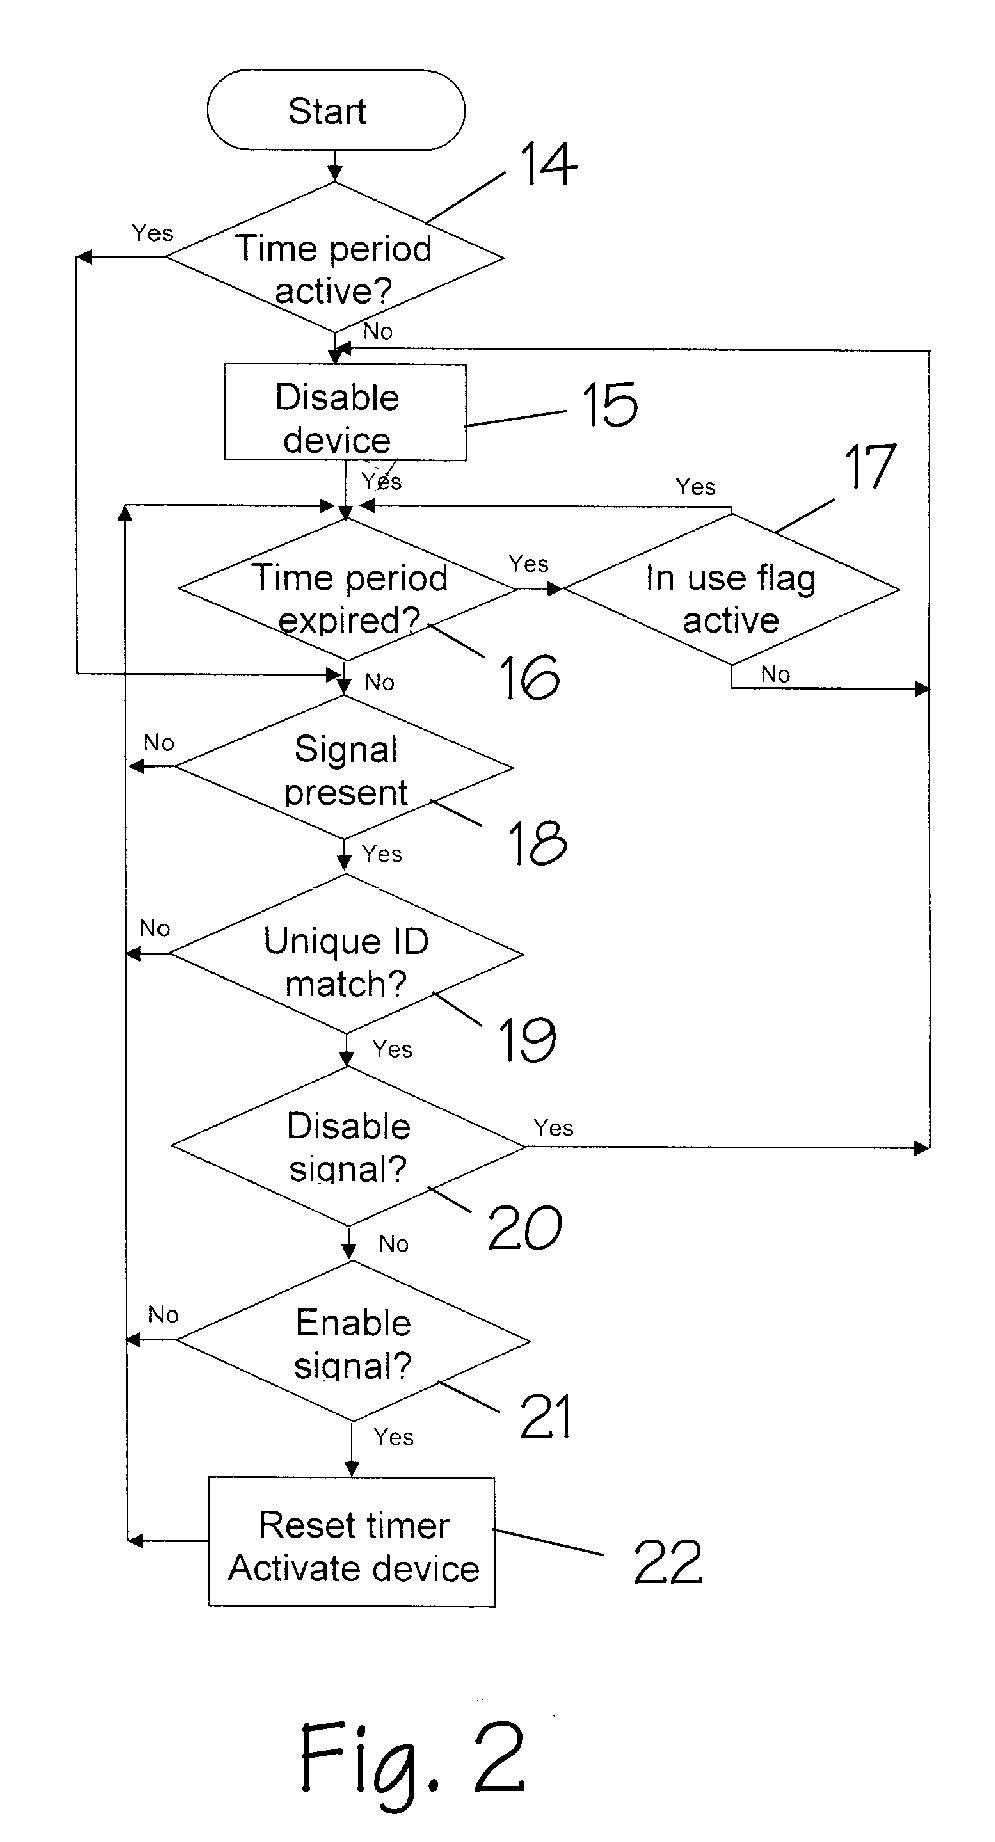 Electronically enabling devices remotely